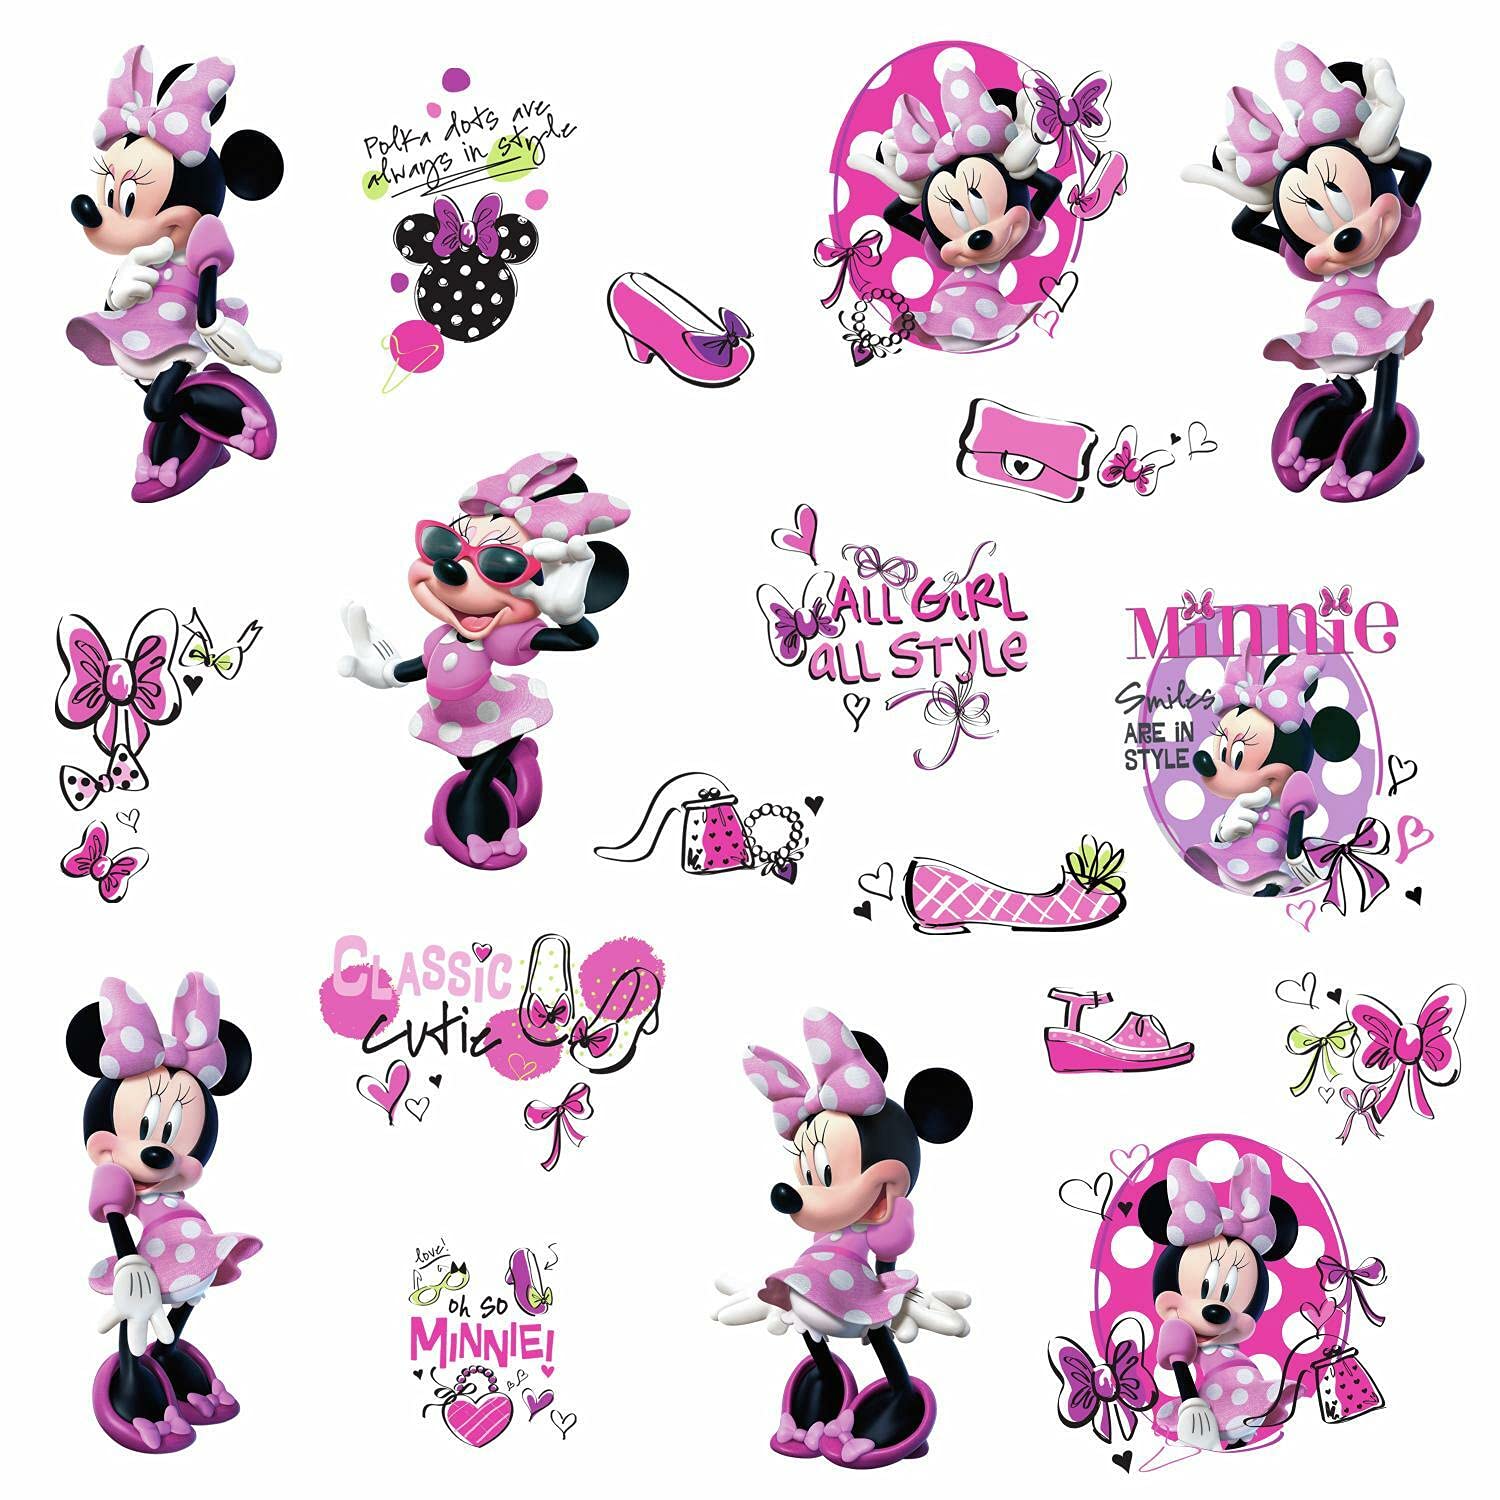 RoomMates RMK2554SCS Disney Minni Mouse Fashionista Peel and Stick Wall Decals